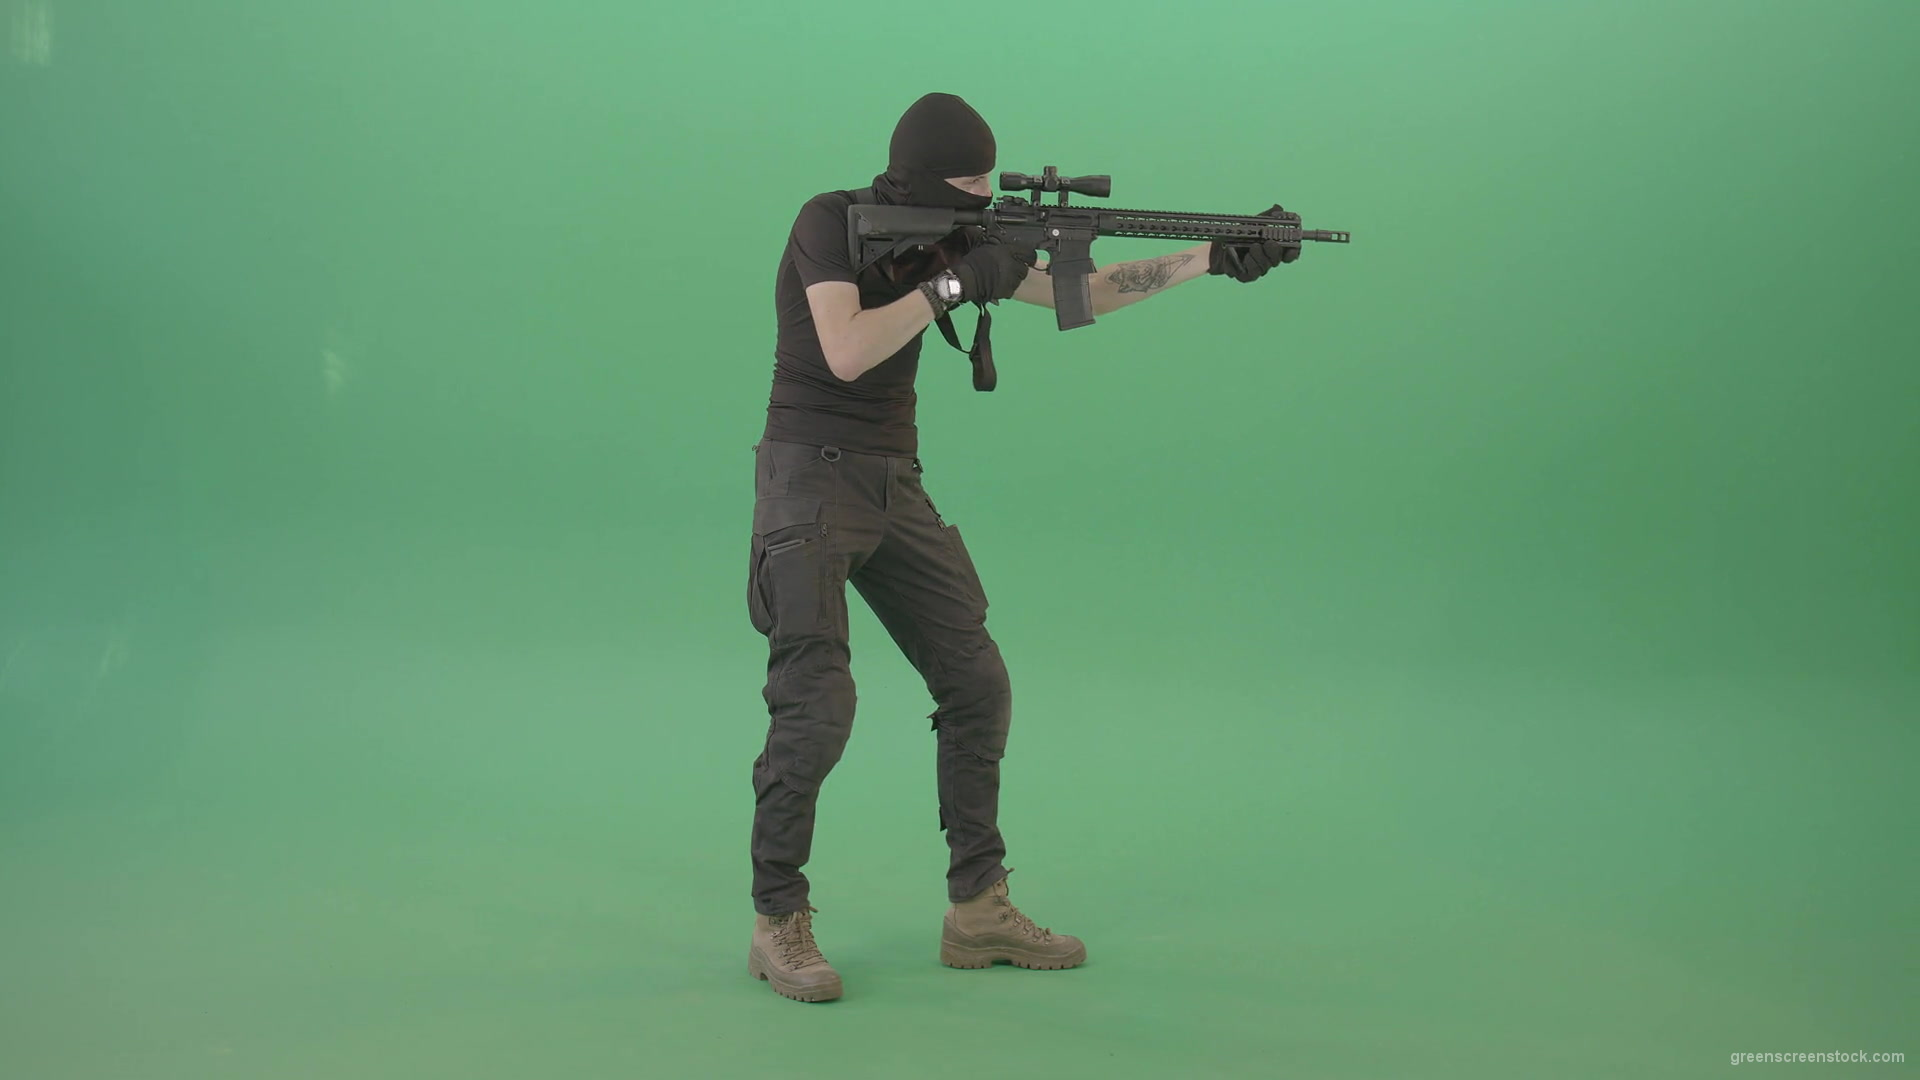 Army-soldier-shooting-with-gun-on-green-screen-4K-Video-Clip-1920_006 Green Screen Stock